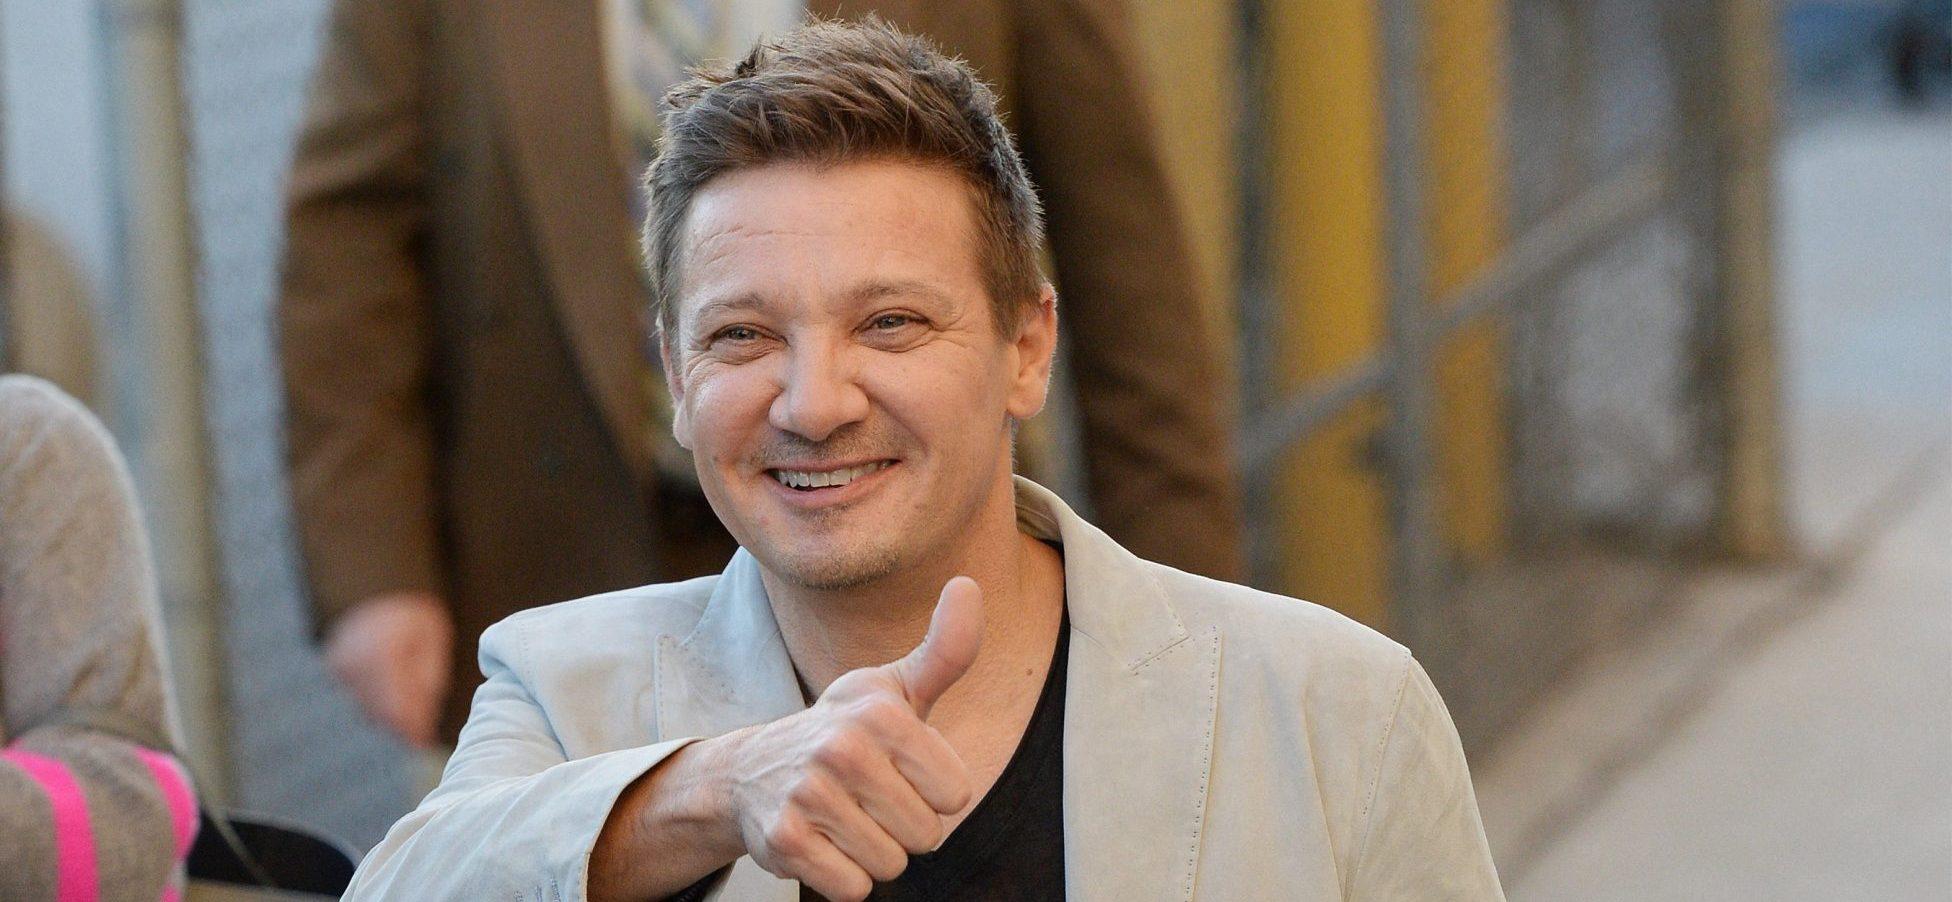 Jeremy Renner Credits Daughter For Inspiration As Intense Recovery Continues